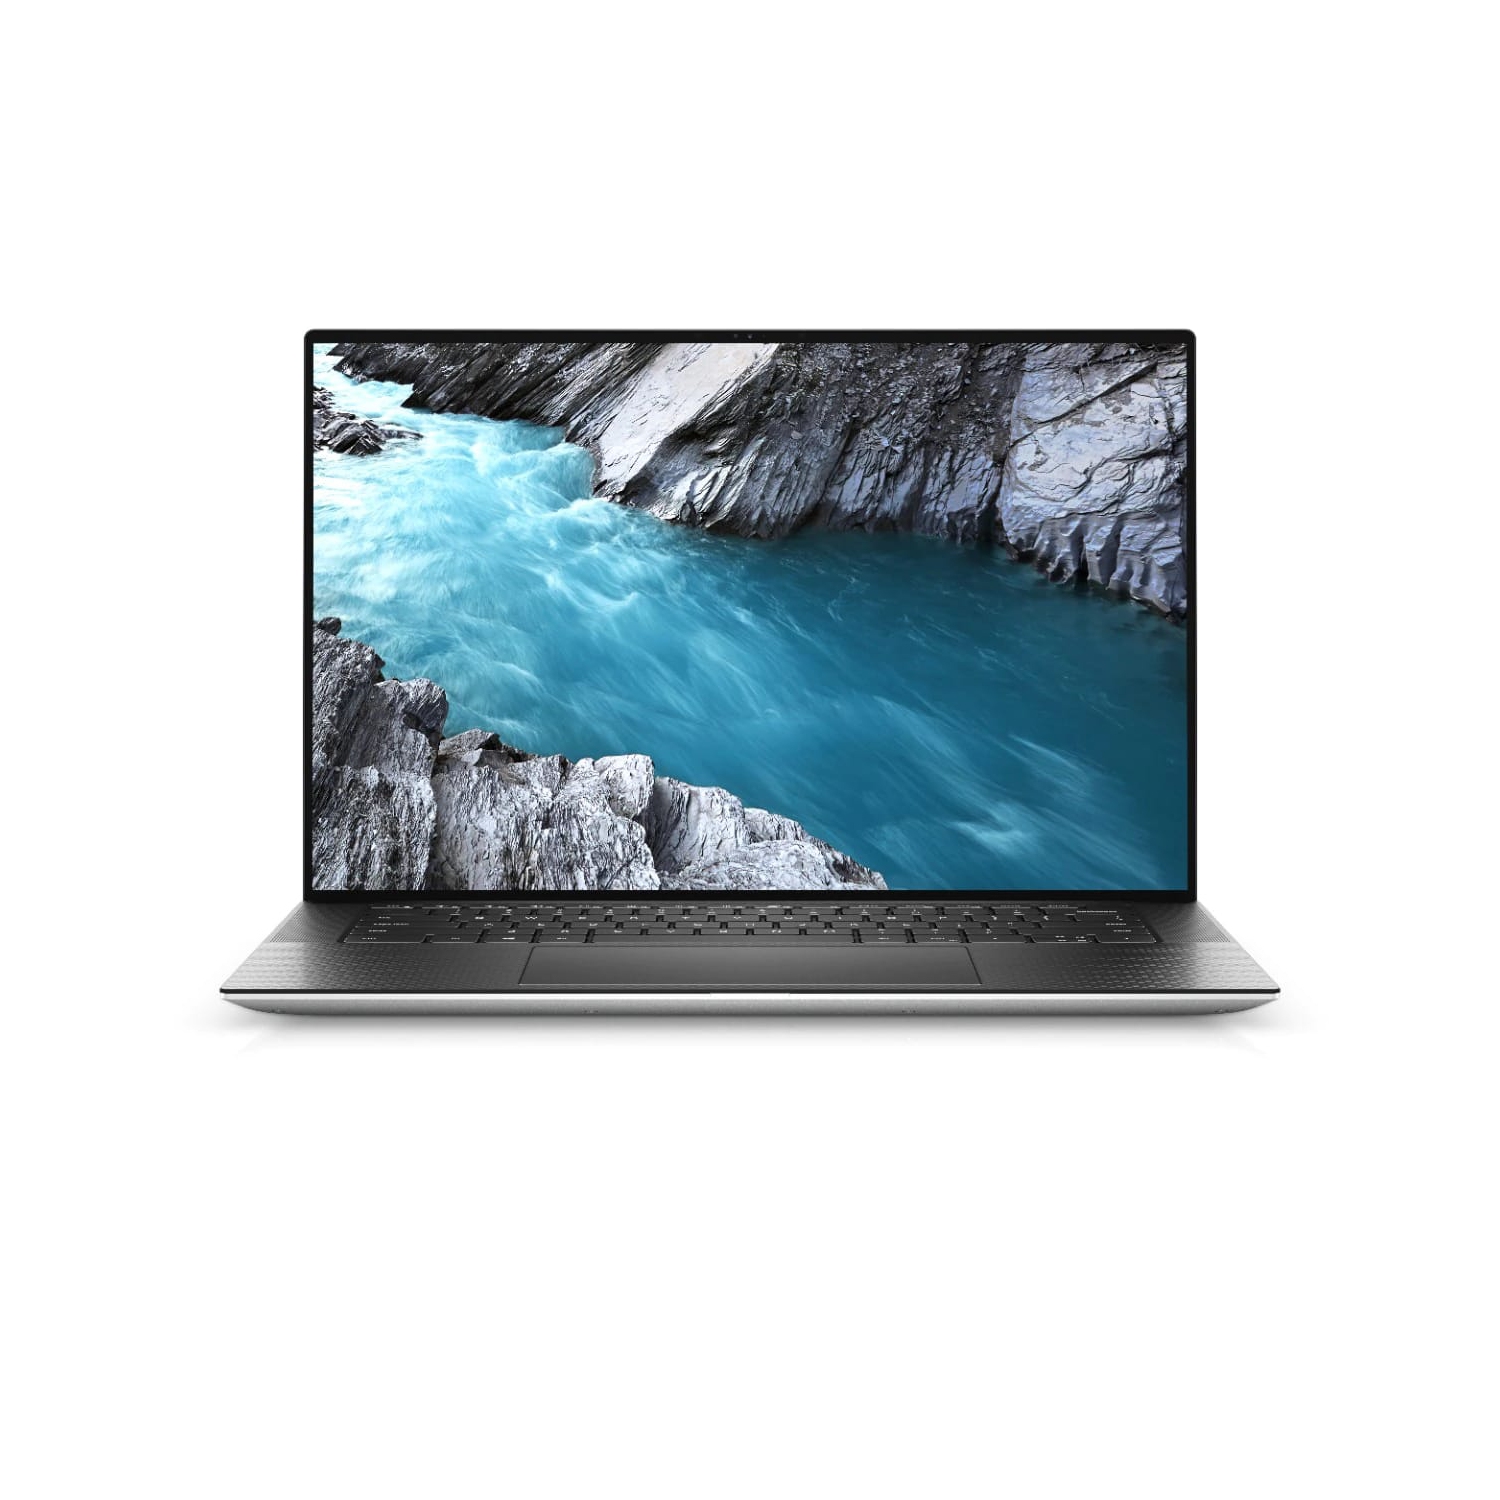 Refurbished (Excellent) - Dell XPS 15 9500 Laptop (2020) | 15" FHD+ | Core i7 - 1TB SSD - 16GB RAM - 1650 Ti | 8 Cores @ 5.1 GHz - 10th Gen CPU Certified Refurbished